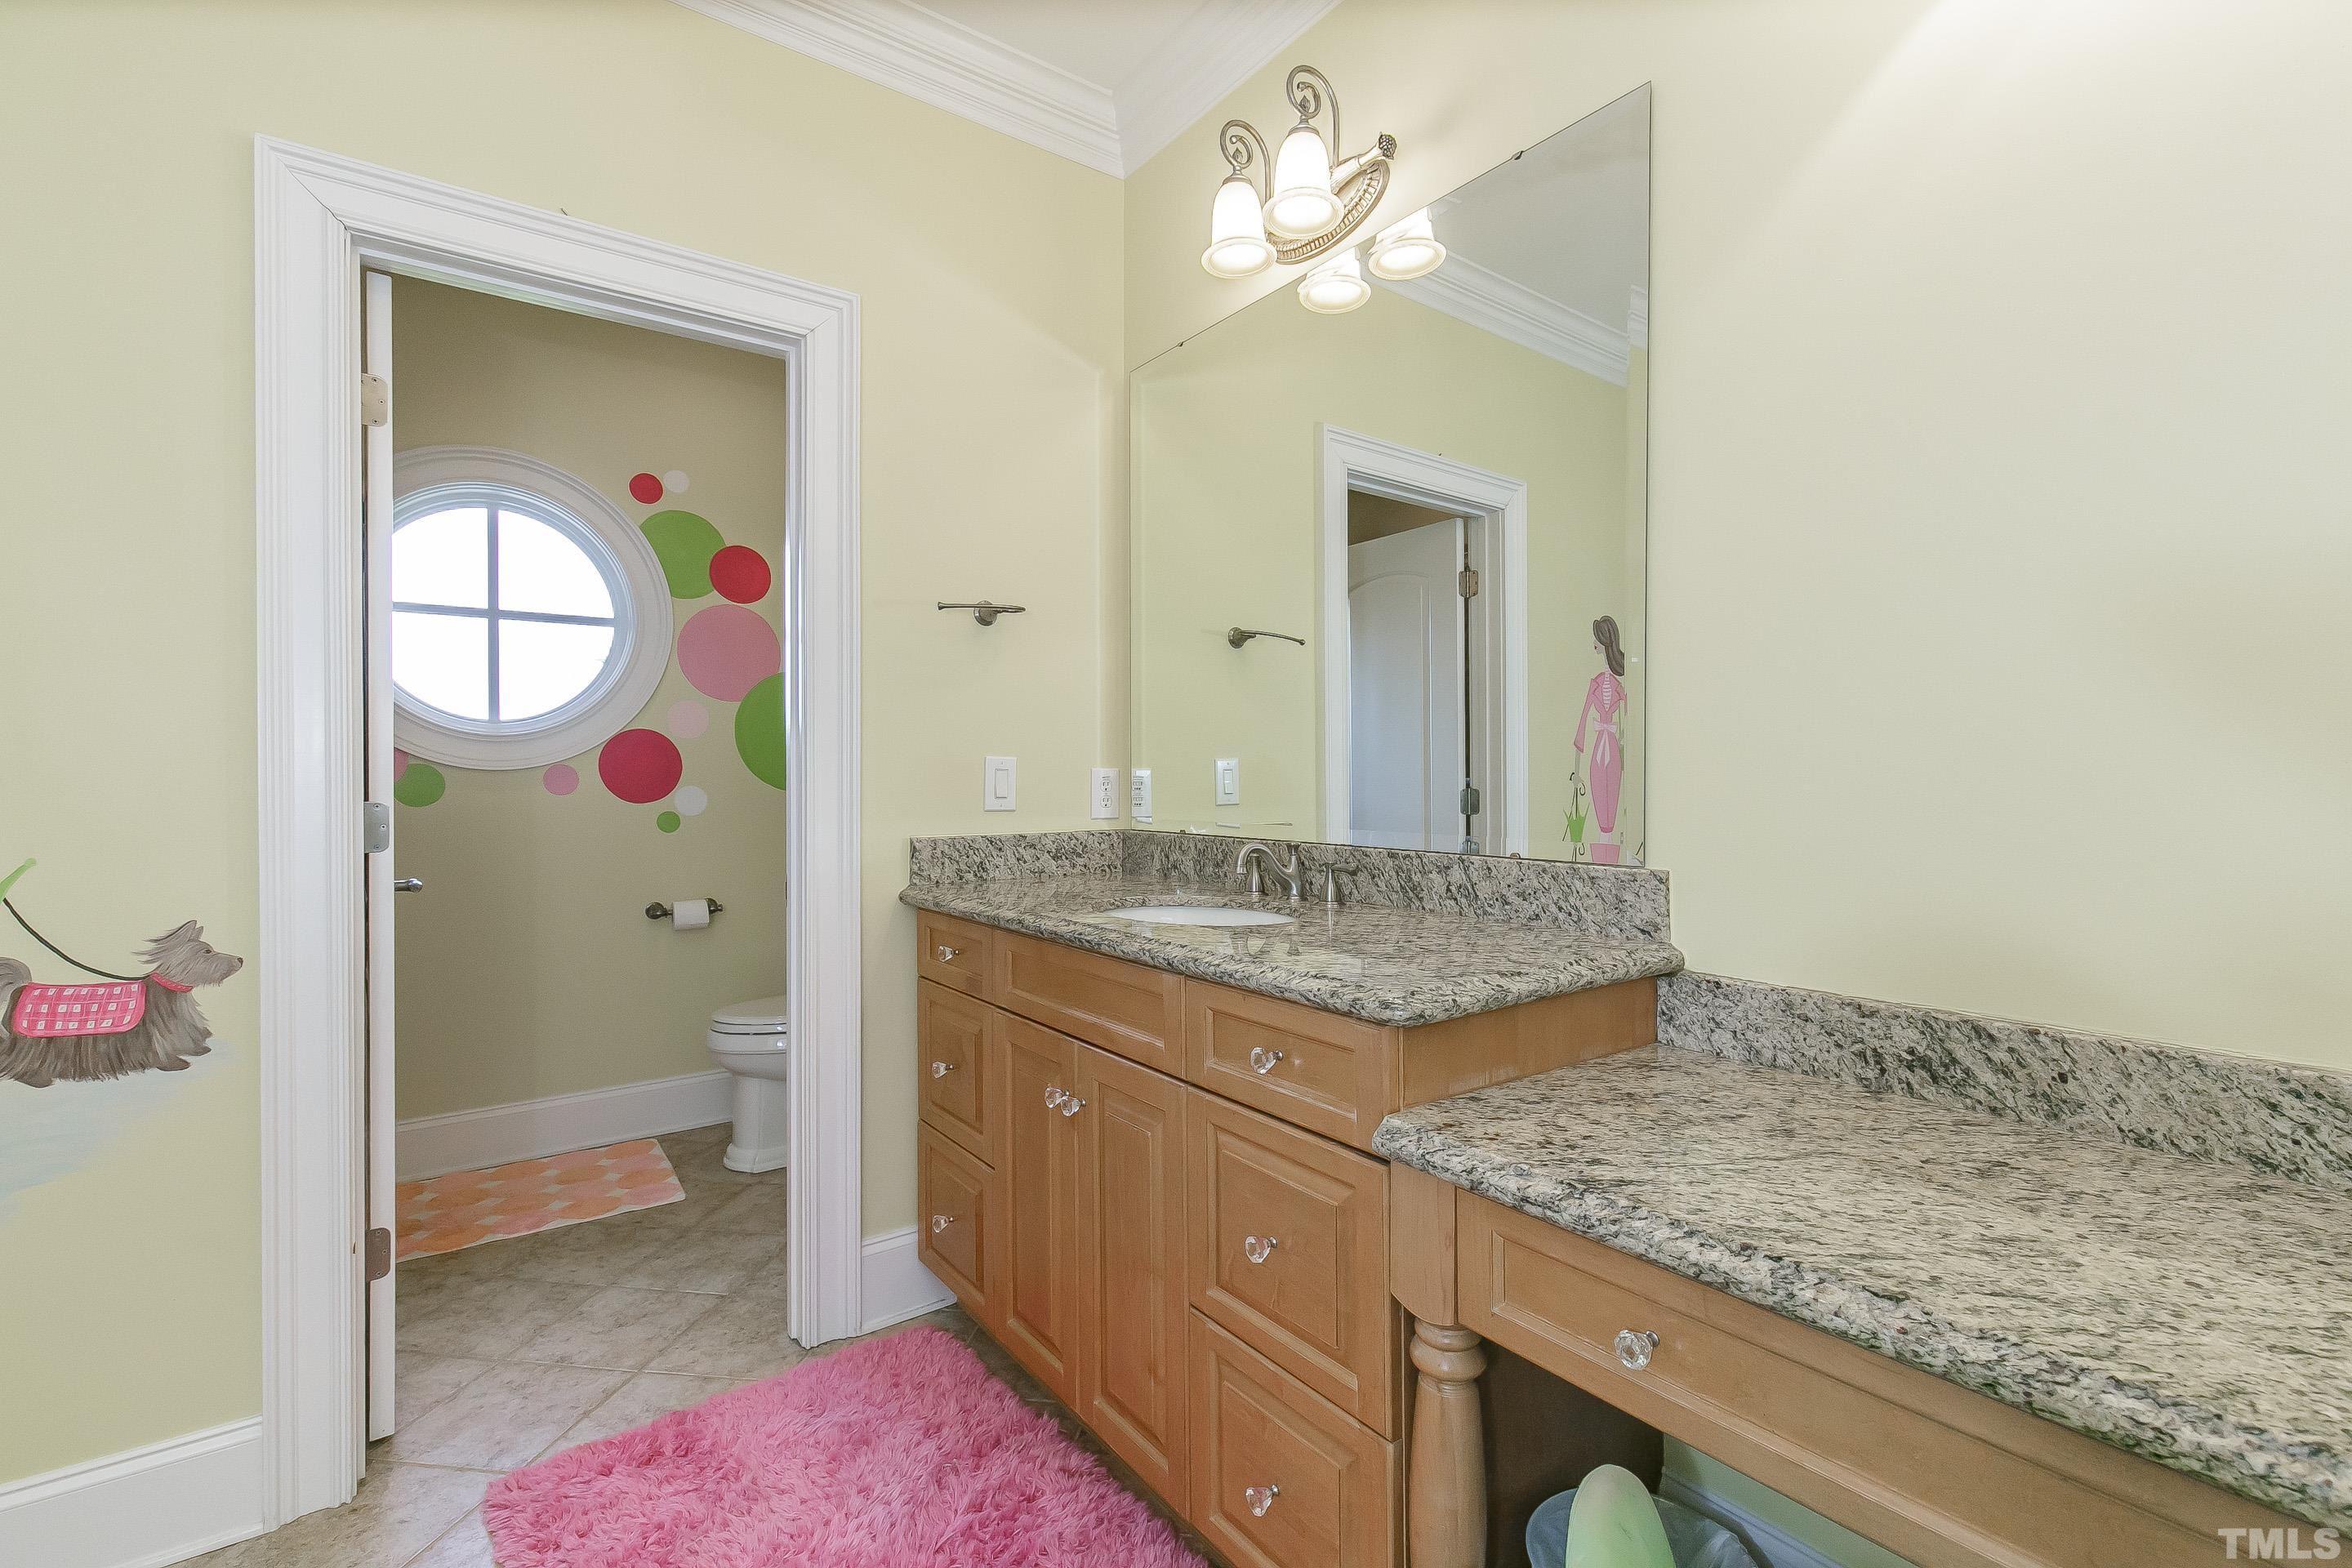 LOVELY In-suite bath with artists painting, granite sink and makeup vanity